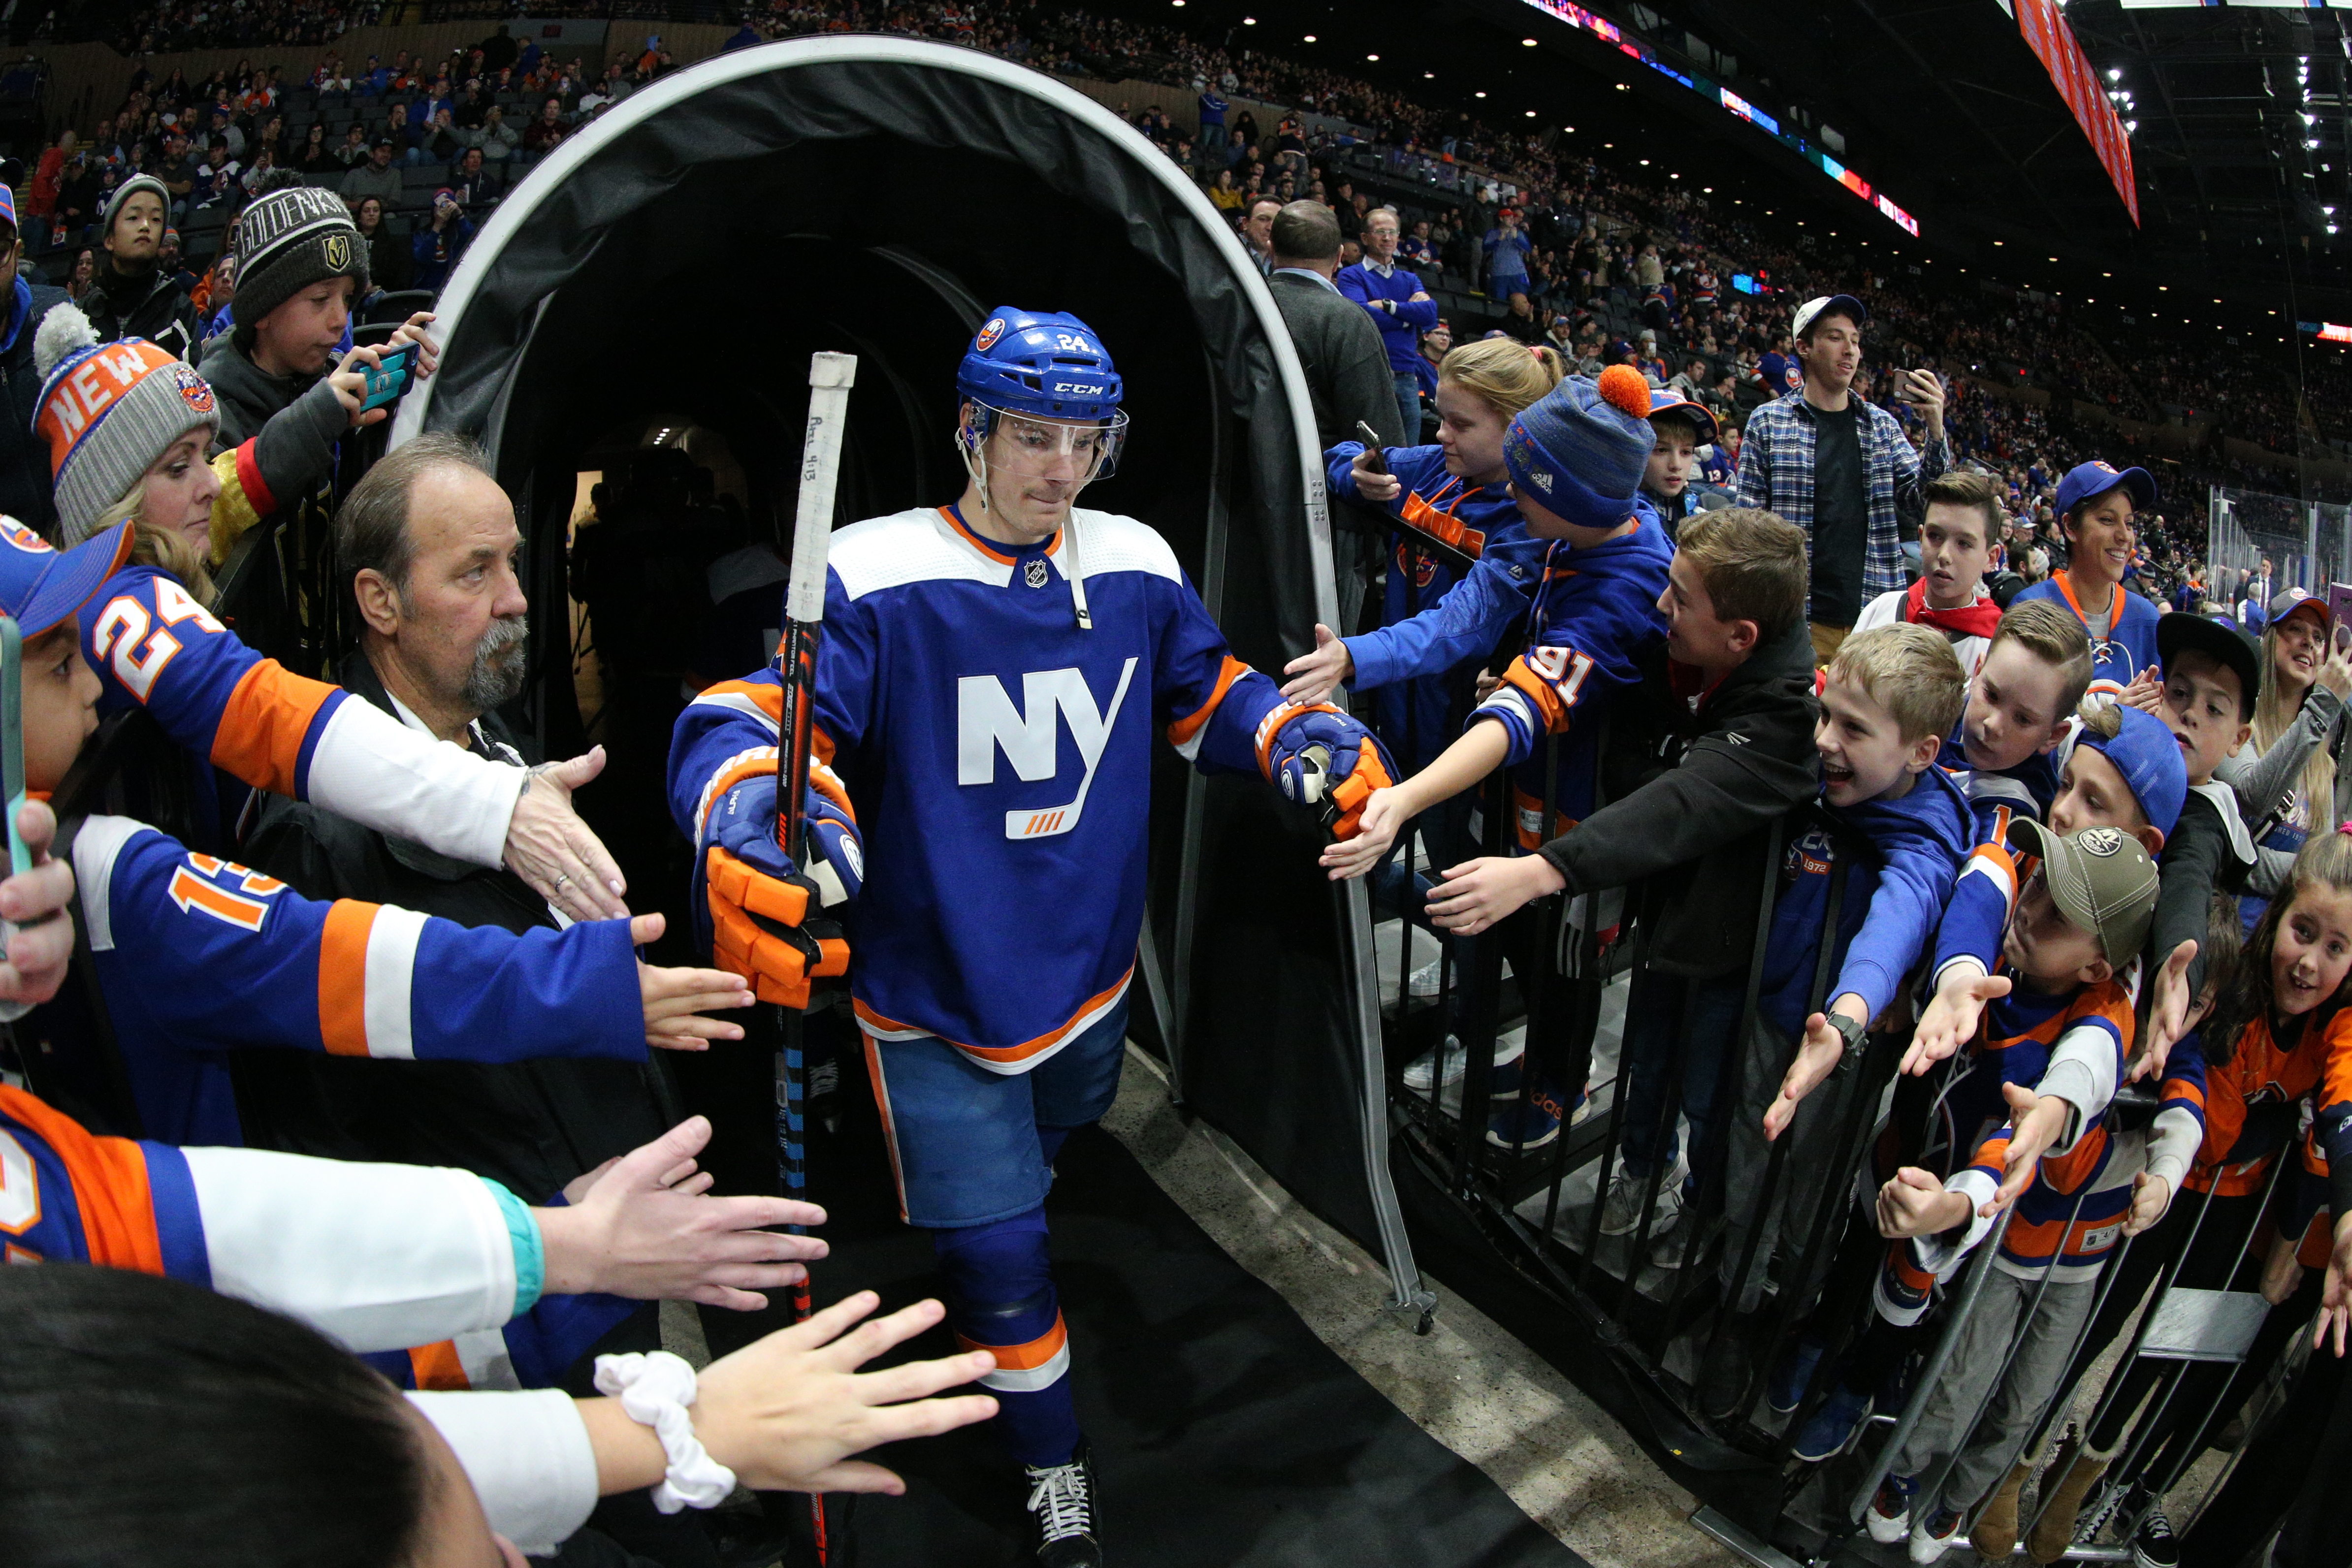 Dec 5, 2019; Uniondale, NY, USA; New York Islanders defenseman Scott Mayfield (24) walks to the ice prior to the game against the Vegas Golden Knights at Nassau Veterans Memorial Coliseum. Mandatory Credit: Brad Penner-USA TODAY Sports